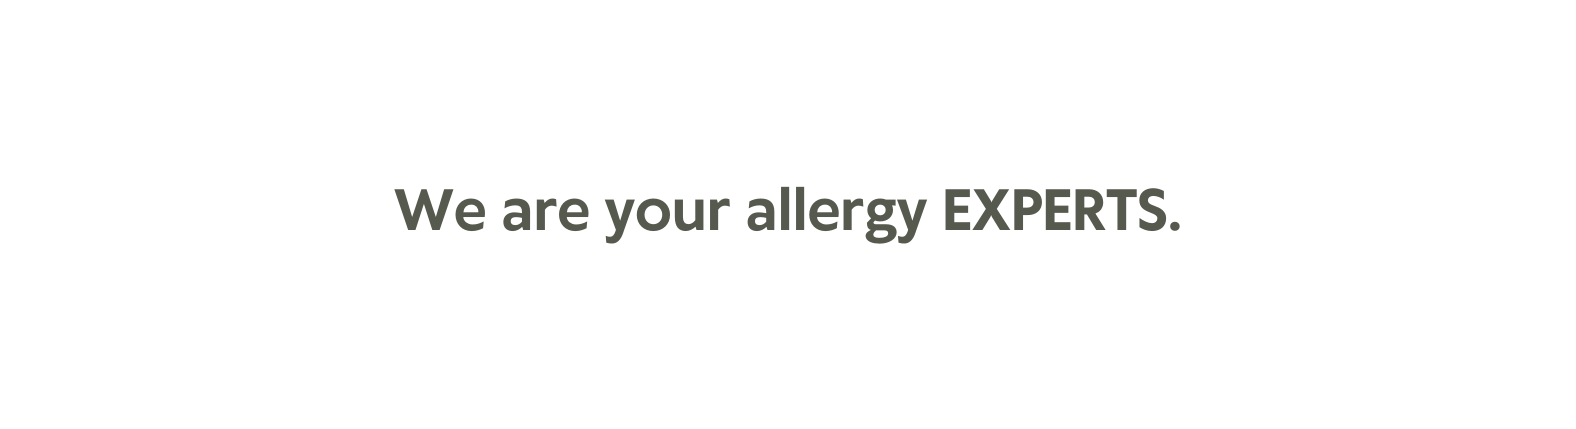 We are your allergy EXPERTS